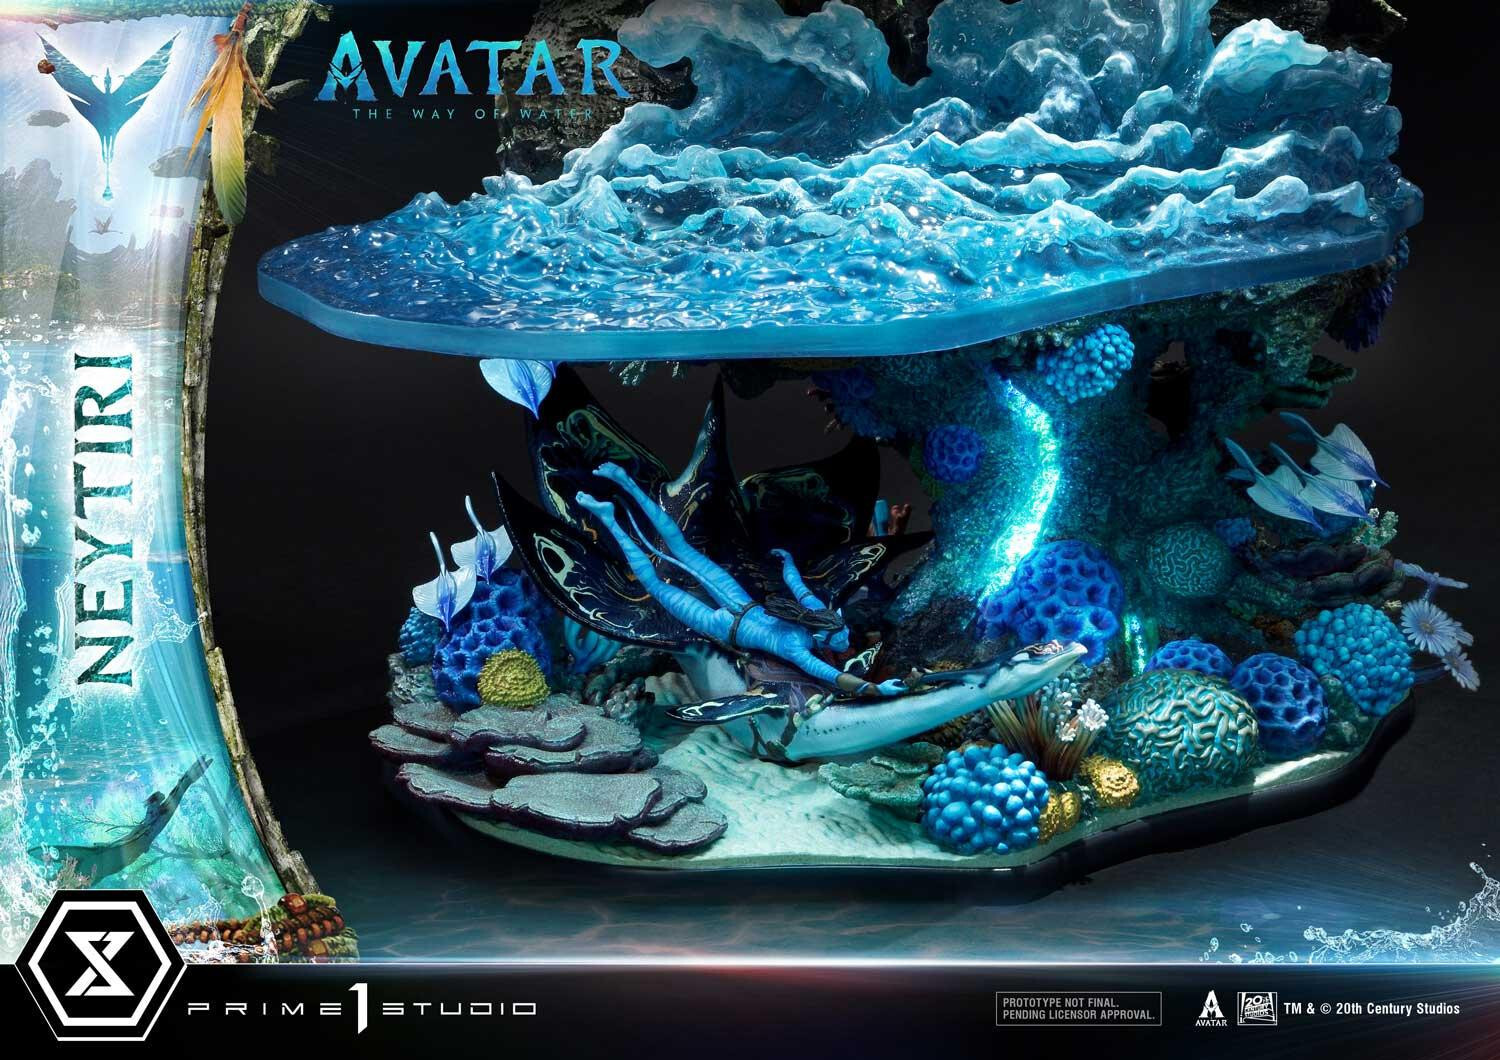 Avatar-Way of Water BD+DC, 1 ct - King Soopers